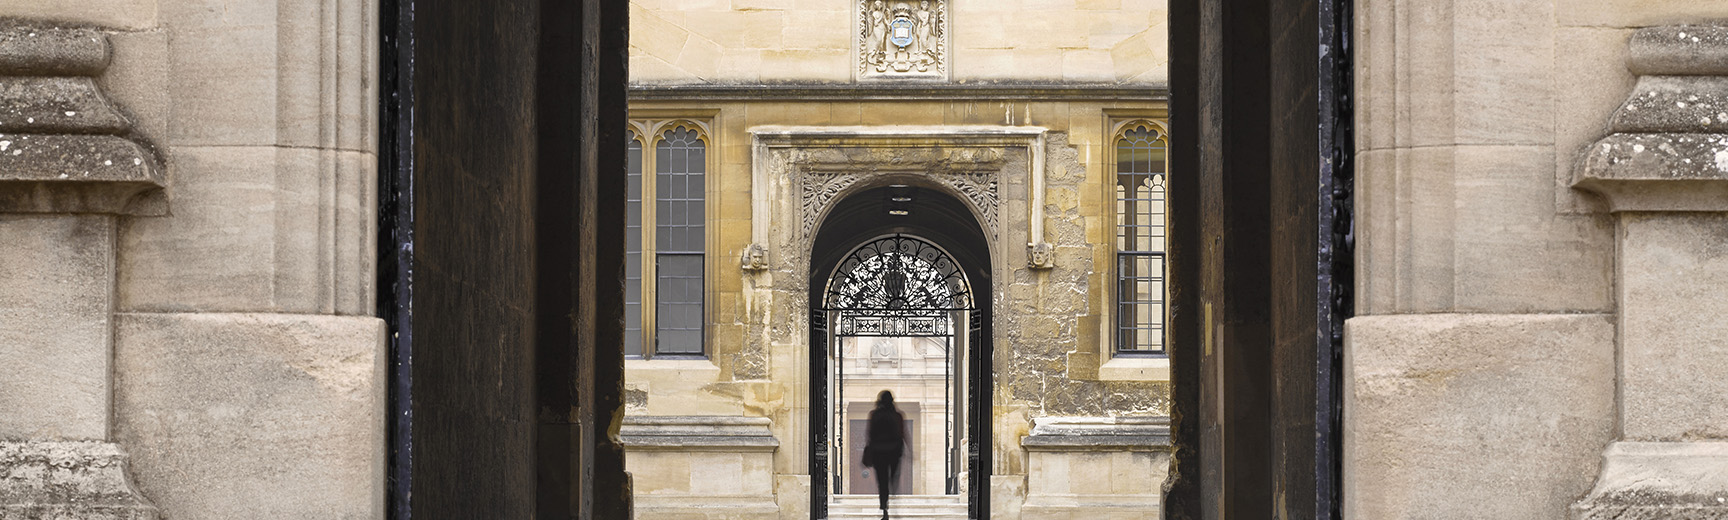 The silhouette of a person walking through an archway into the Old Bodleian Library